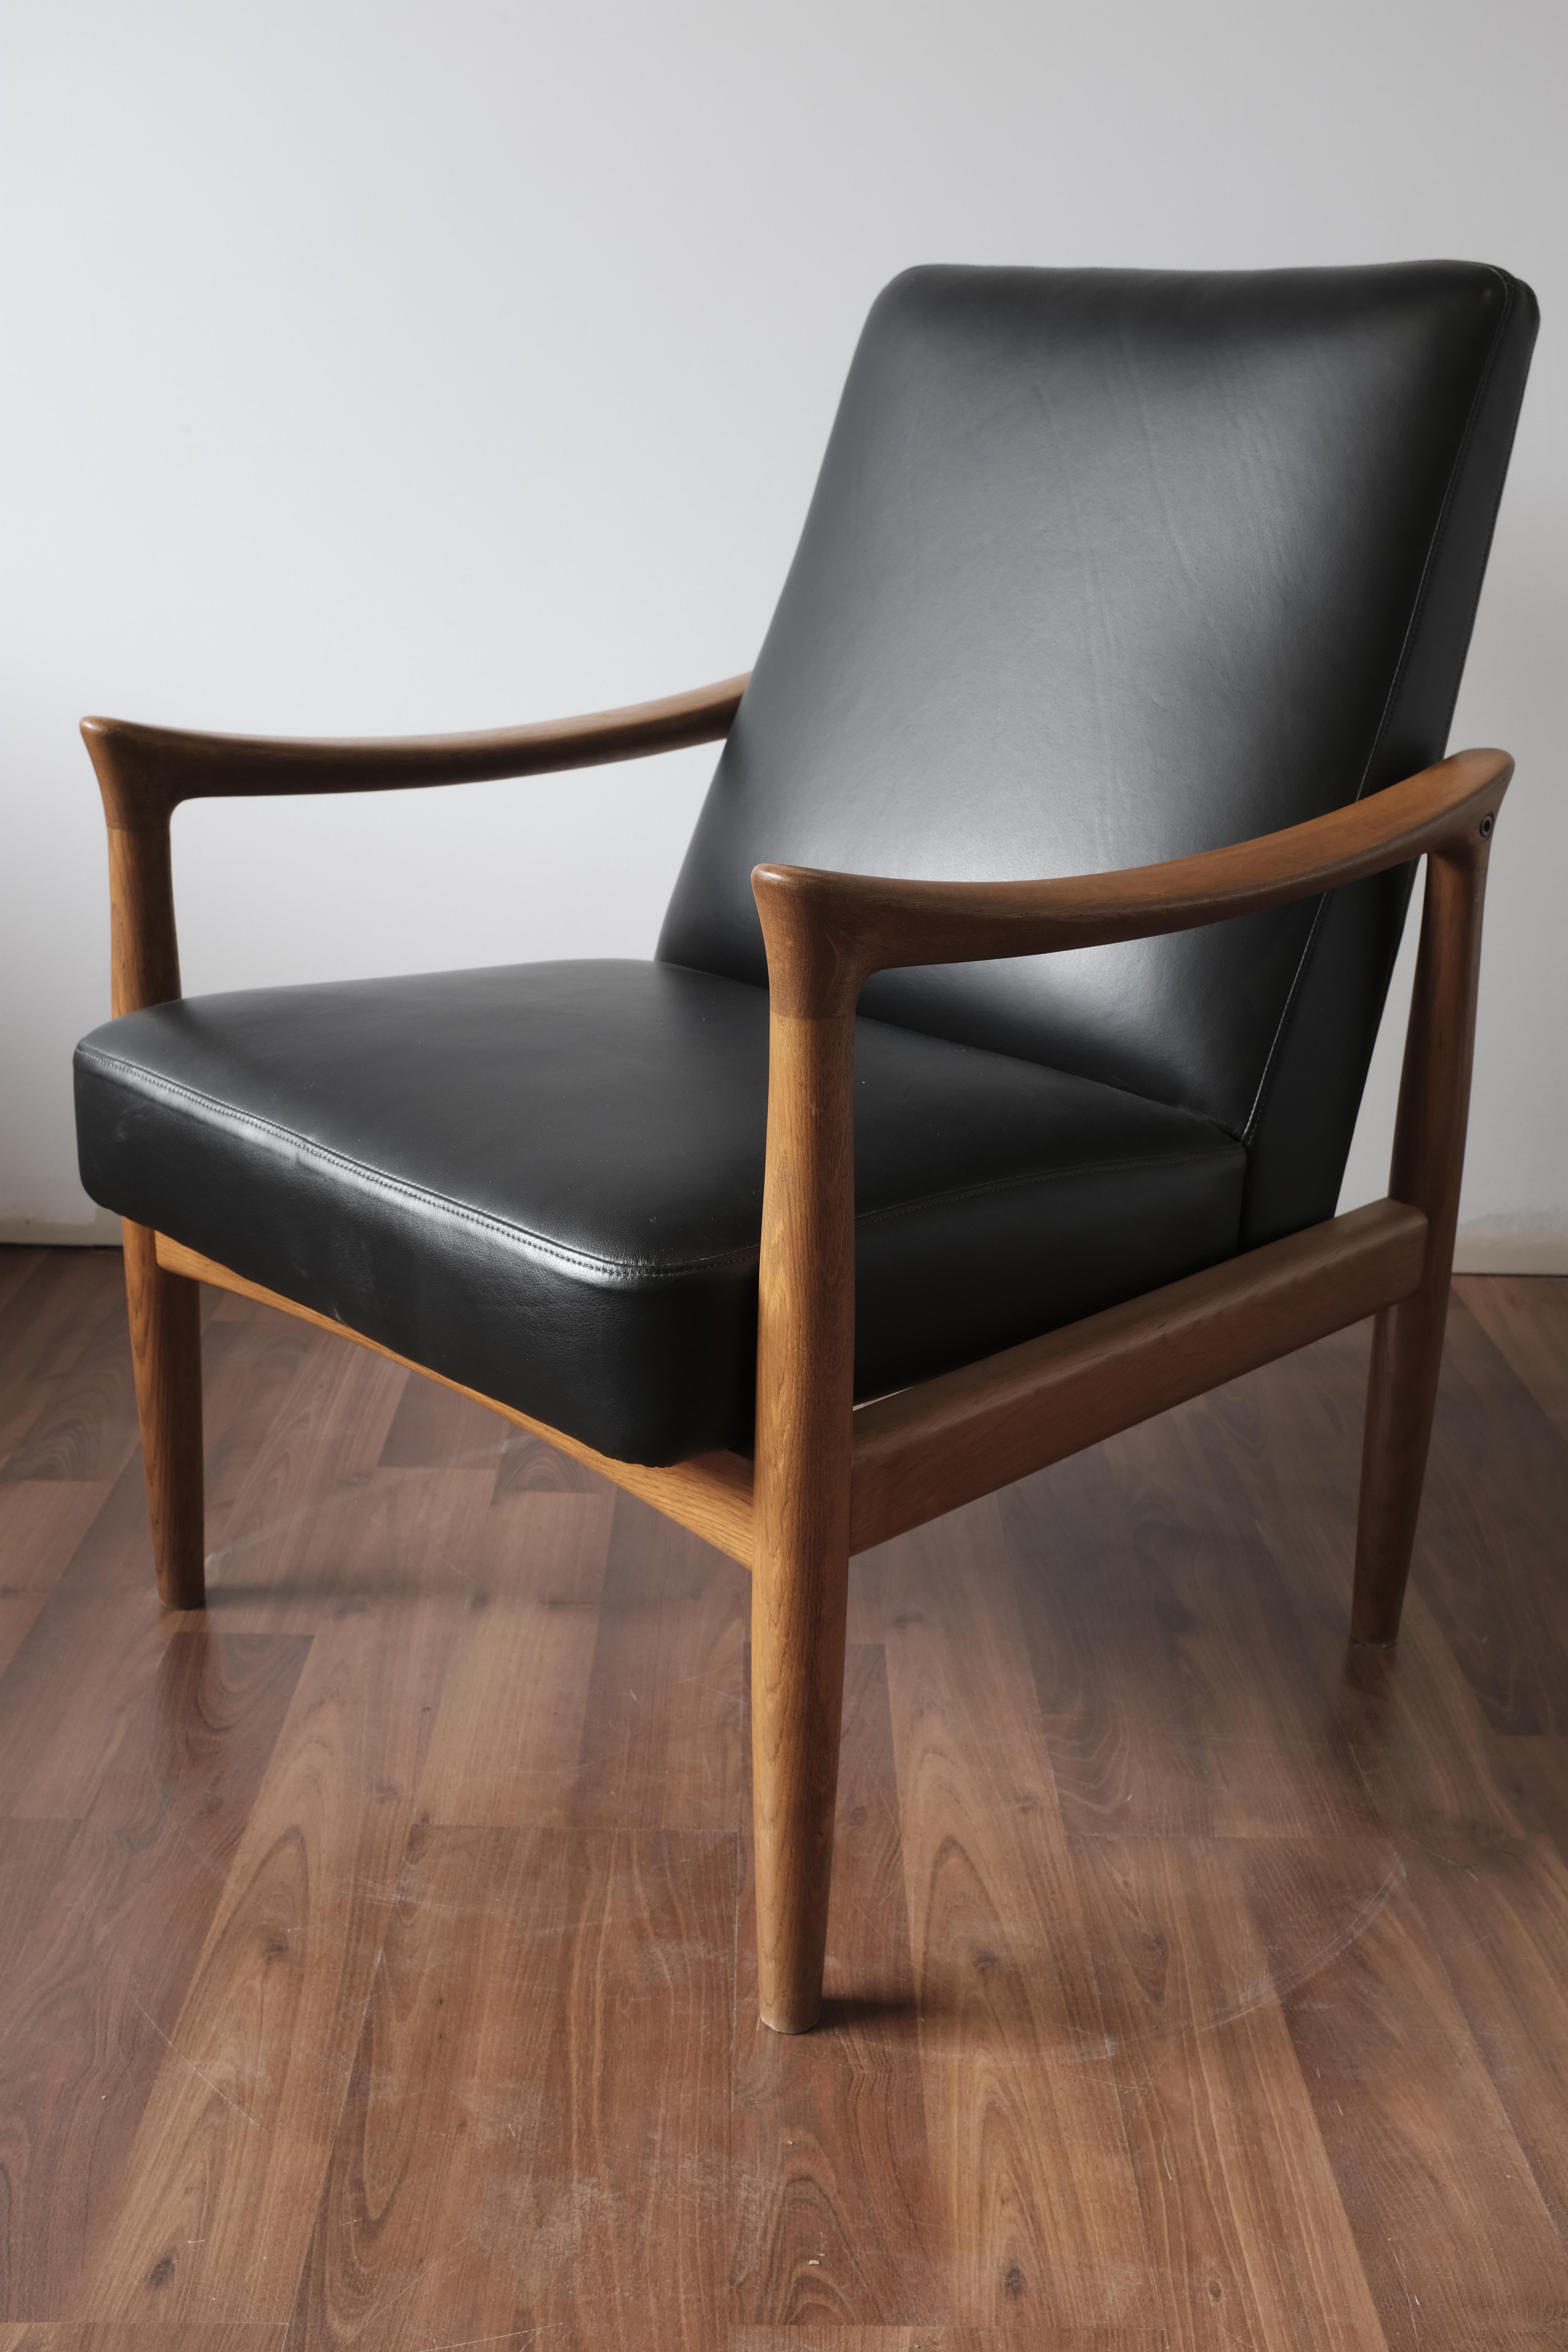 Armchair made in Denmark by Fritz Hansen.

The oak frame has been recently refinished while the seat and back have been reupholstered in black leather.